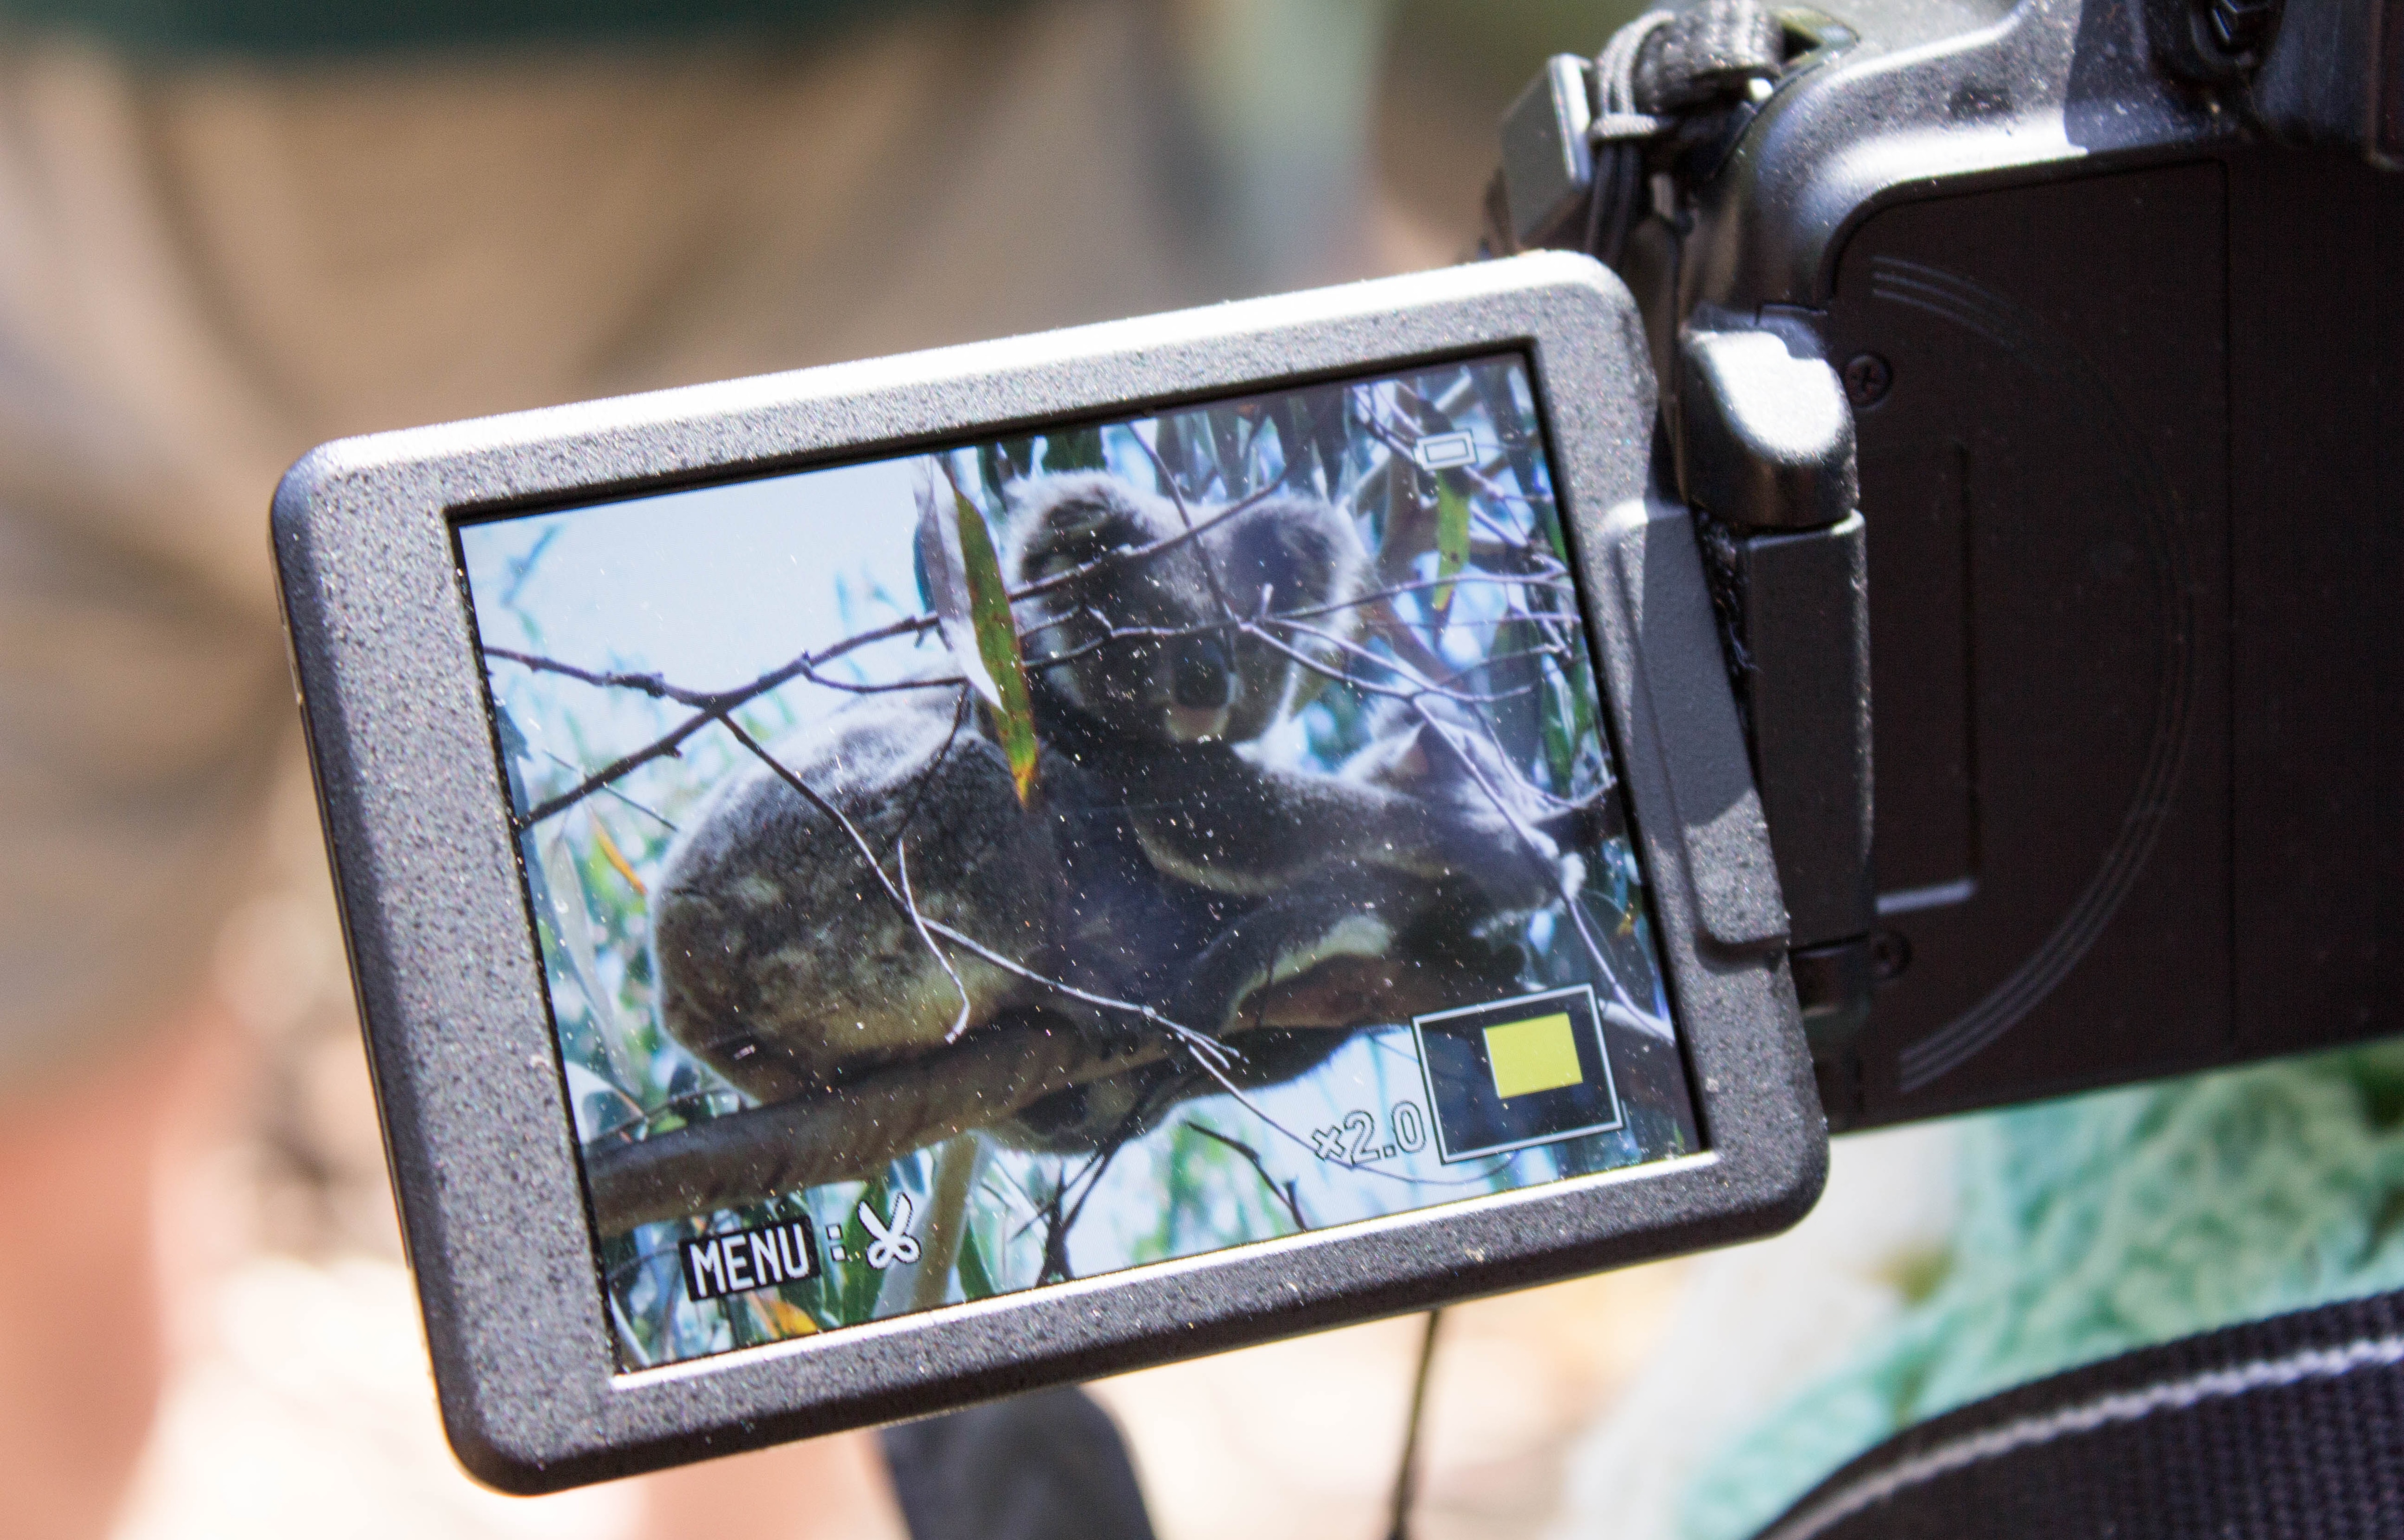 A video camera captures a koala and her joey balancing on a branch.